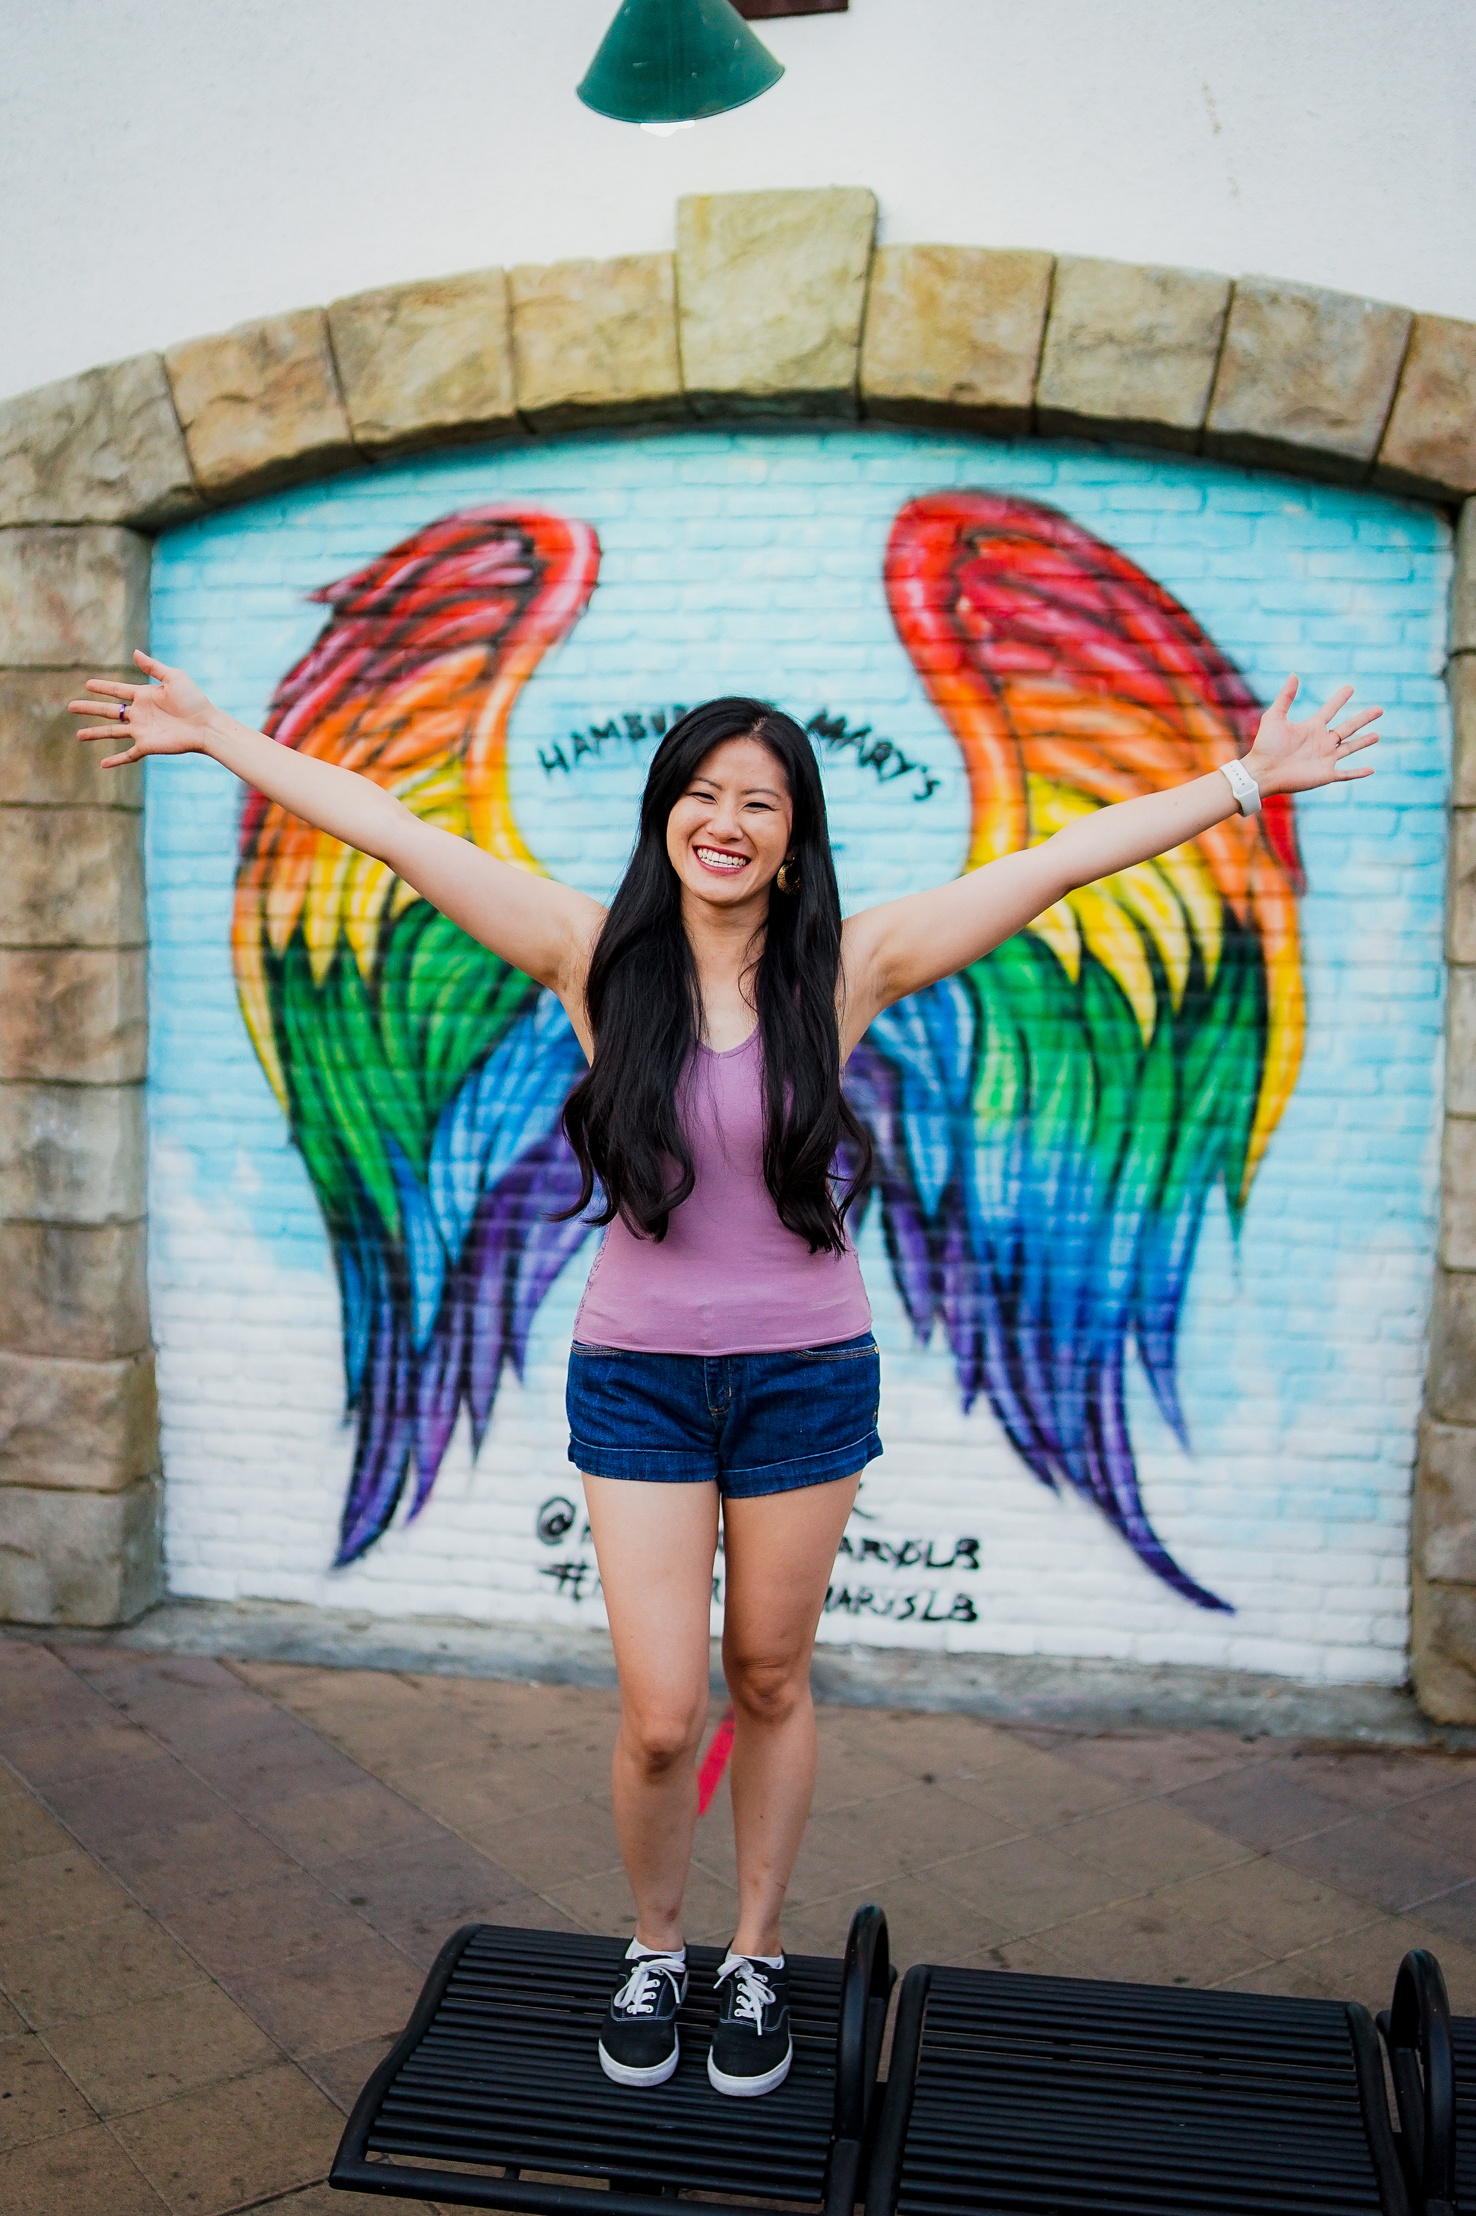 Image of a person with long dark slightly wavy hair, a purple tank top, and dark jean shorts. Arms are spread out in front of a wall painting with a blue background and rainbow-colored angel wings